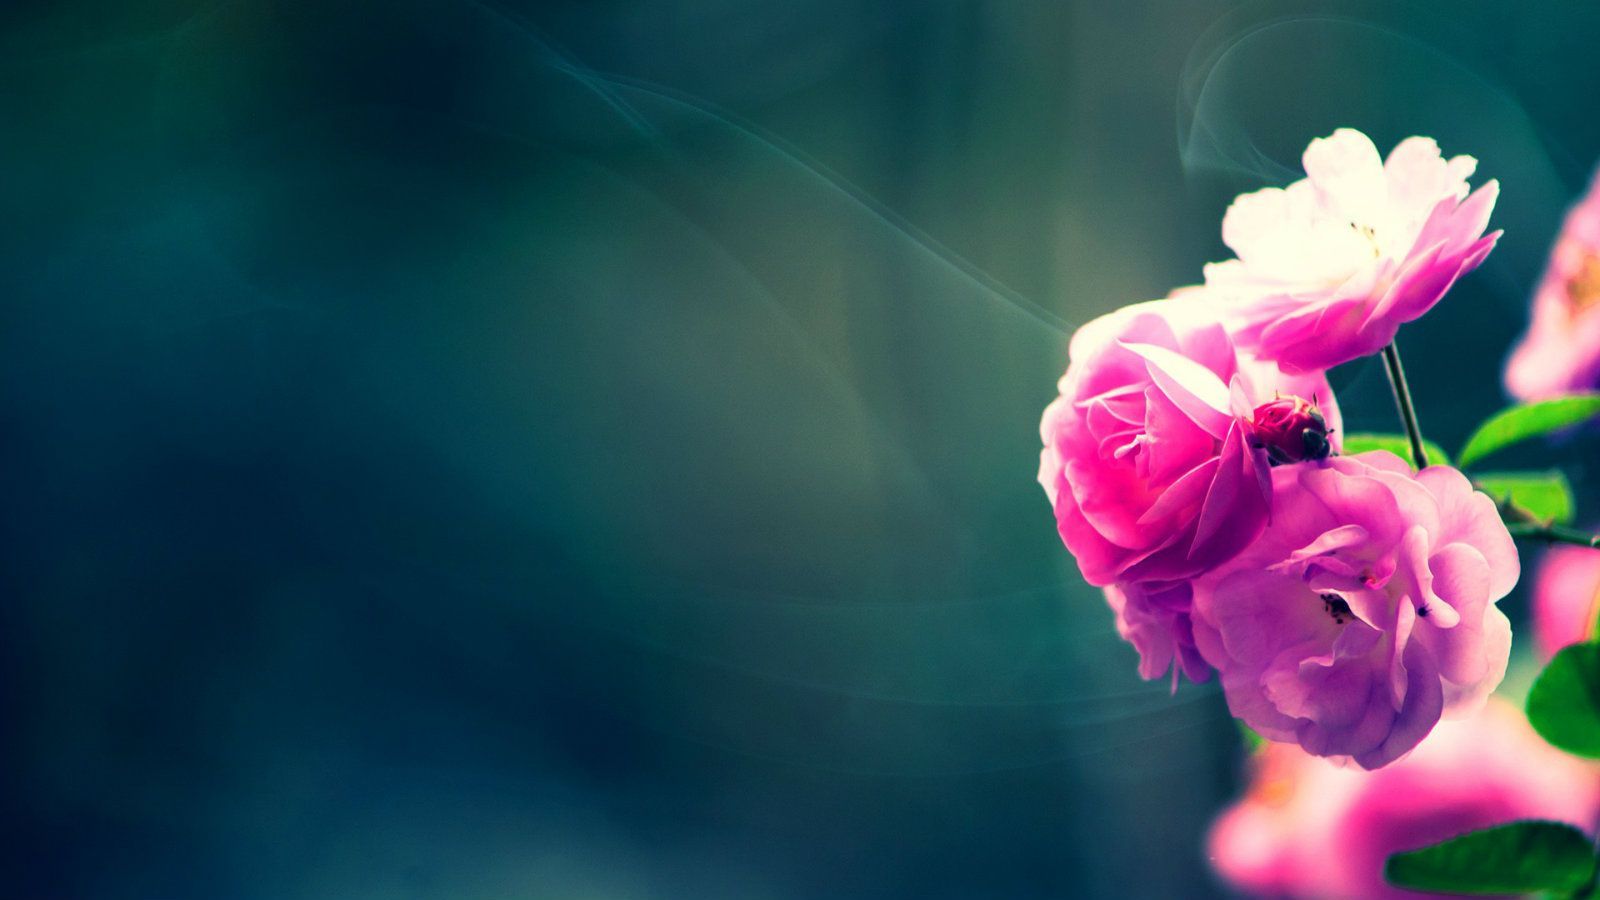 Beautiful Flowers Wallpapers | Most HD Wallpapers Pictures Desktop ...